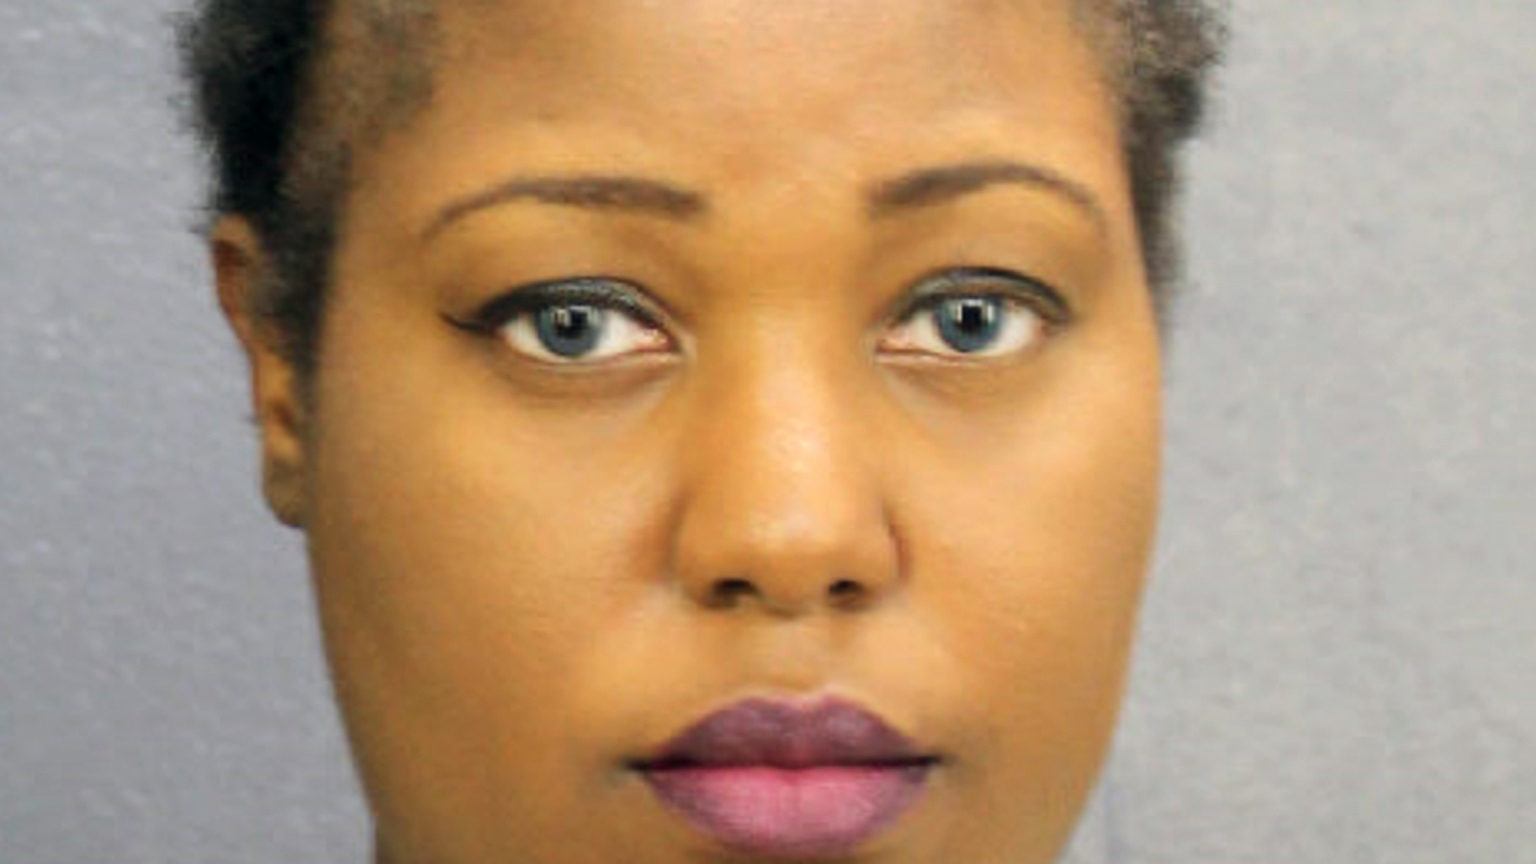 Coral Springs Woman Arrested for Routinely Striking, Punching, her Child